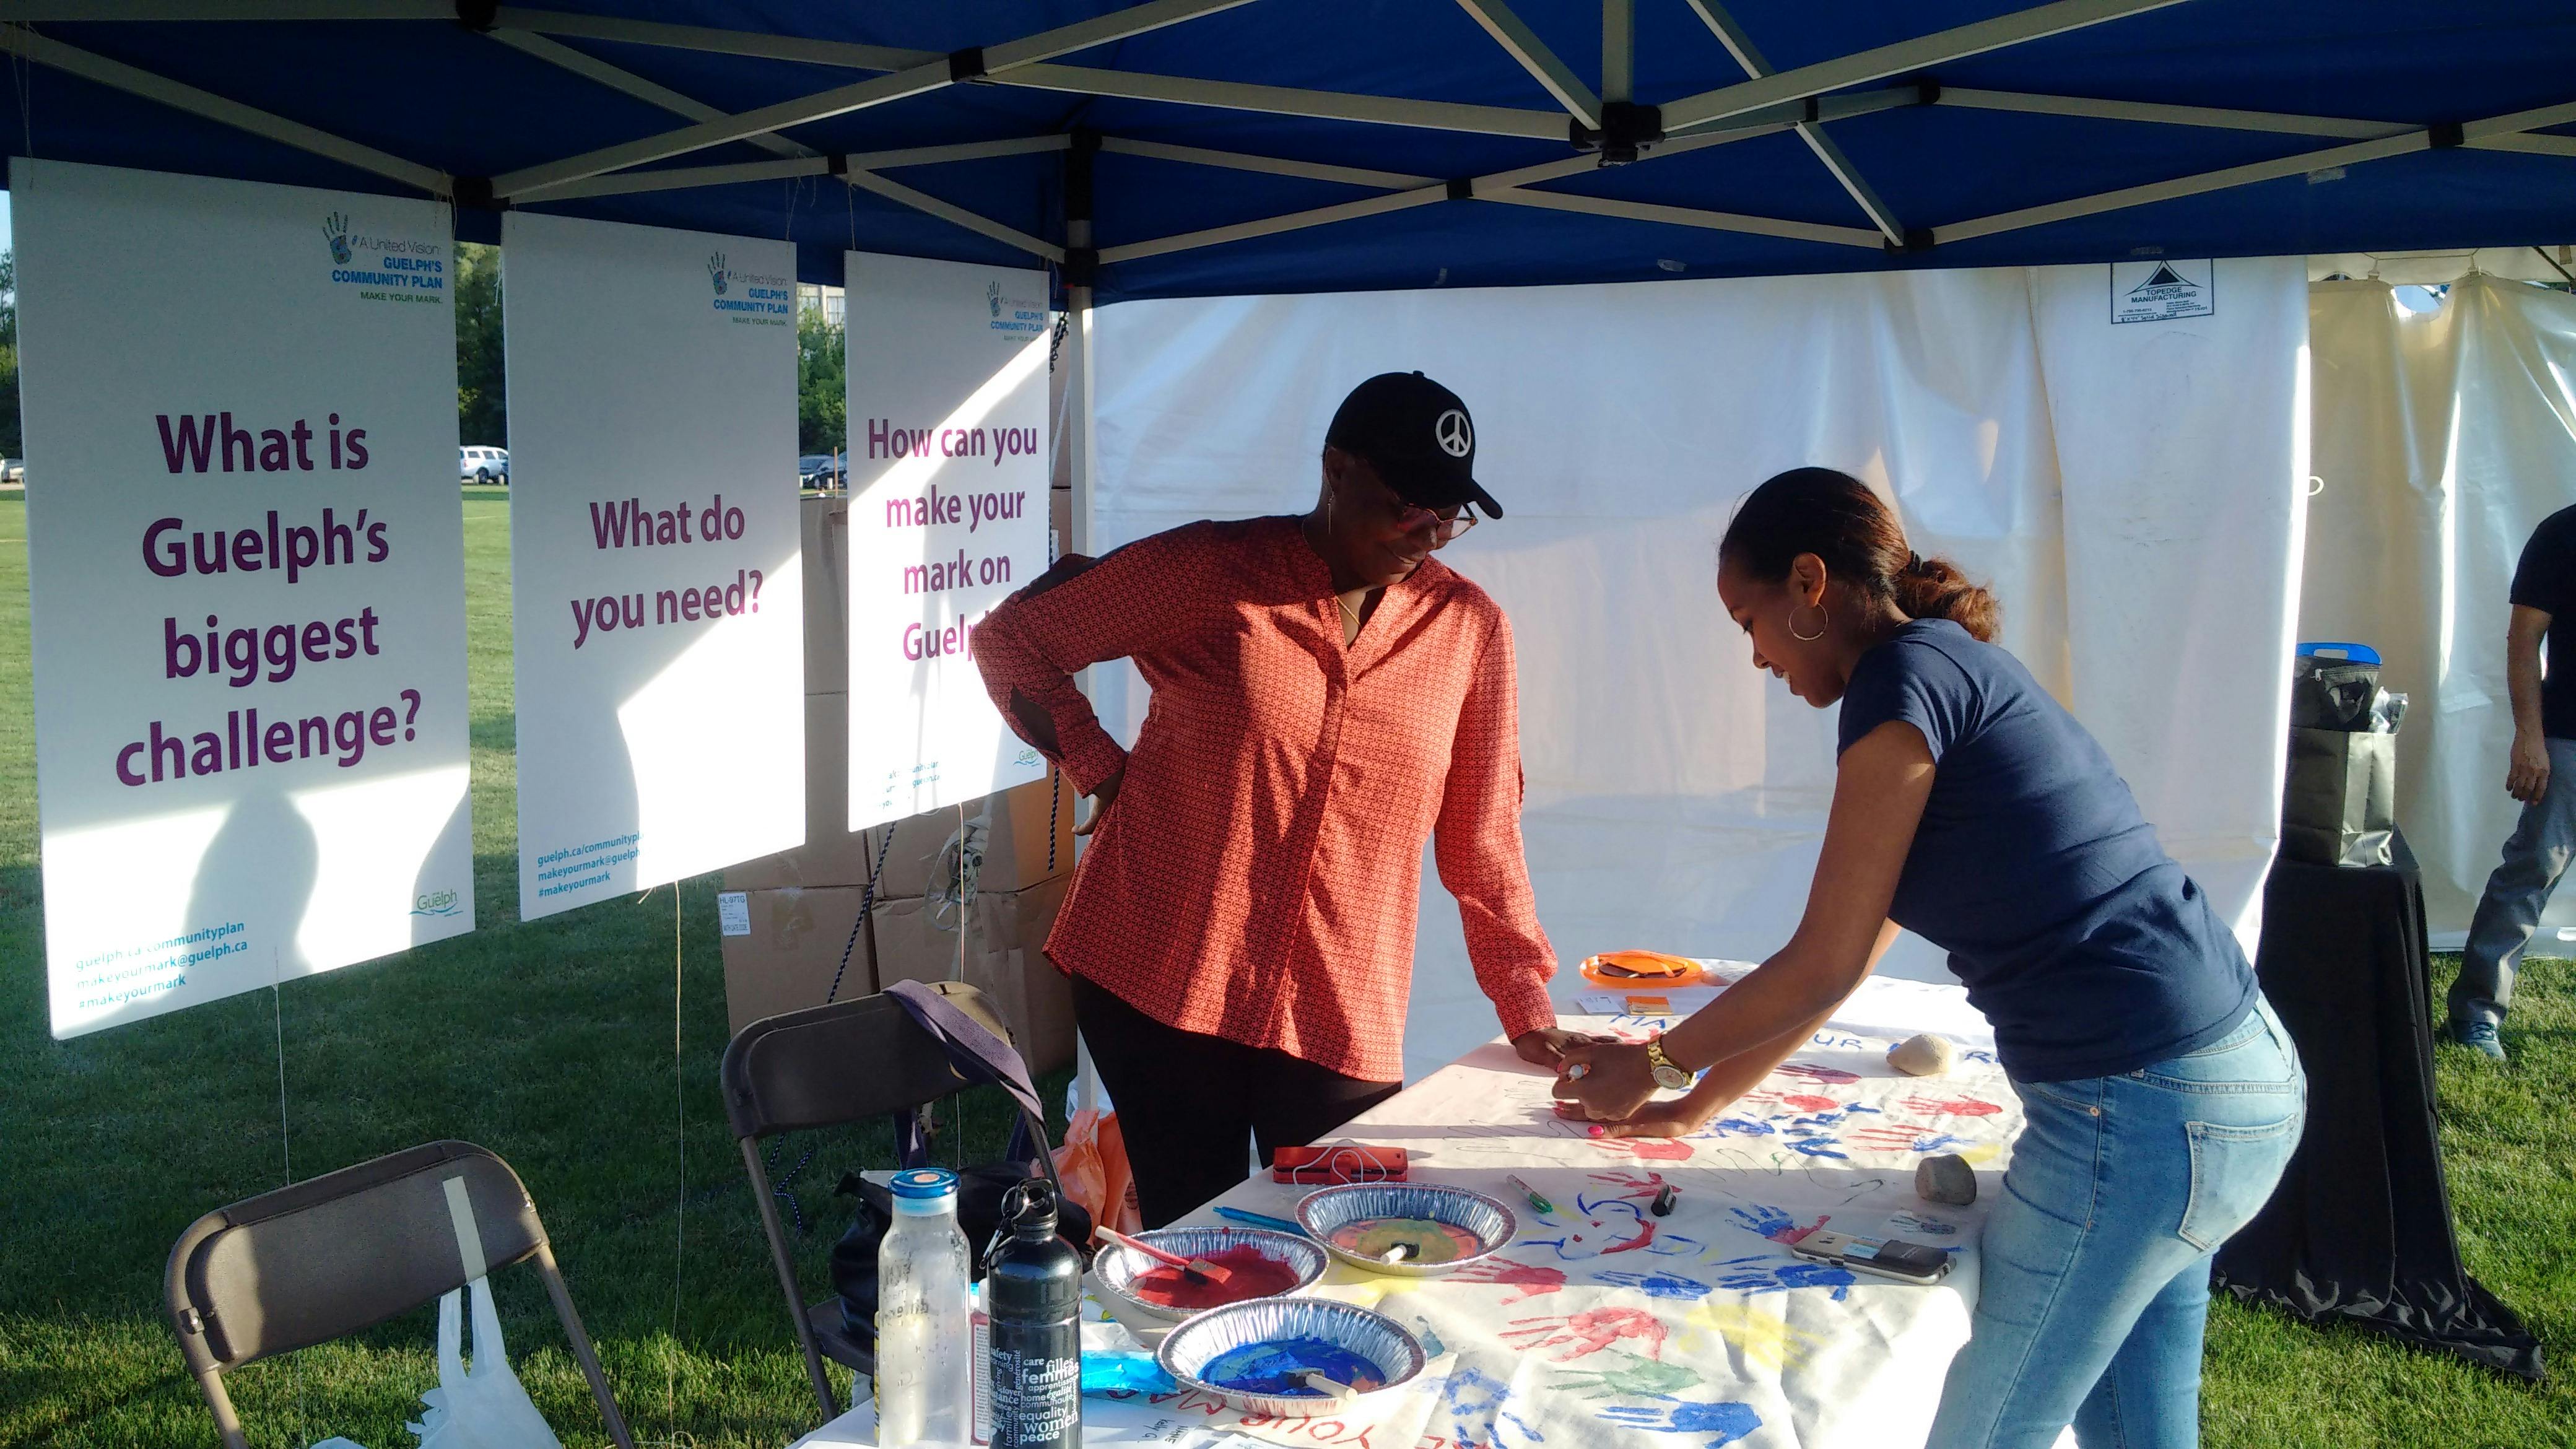 Marva's friend making her mark at the Multicultural Festival